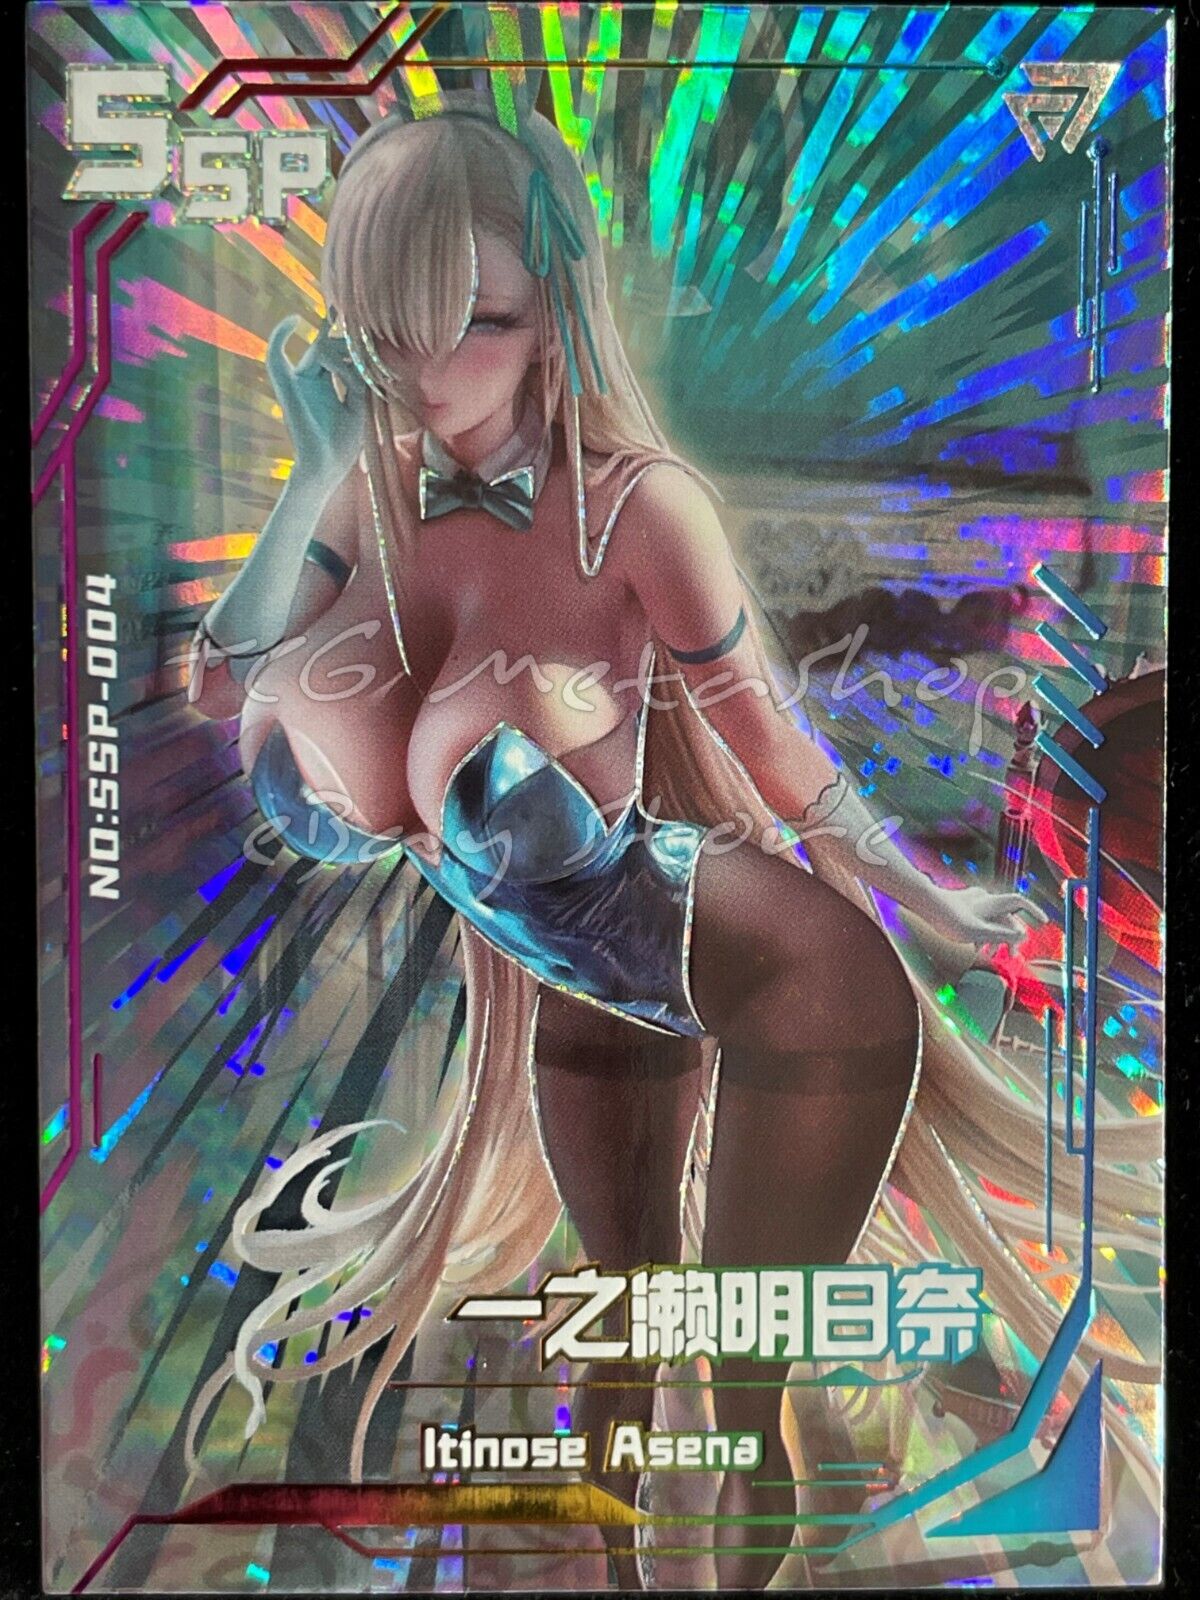 🔥 Goddess Carnival - [SSP] Pick your card - Anime Waifu Doujin THICK Cards 🔥